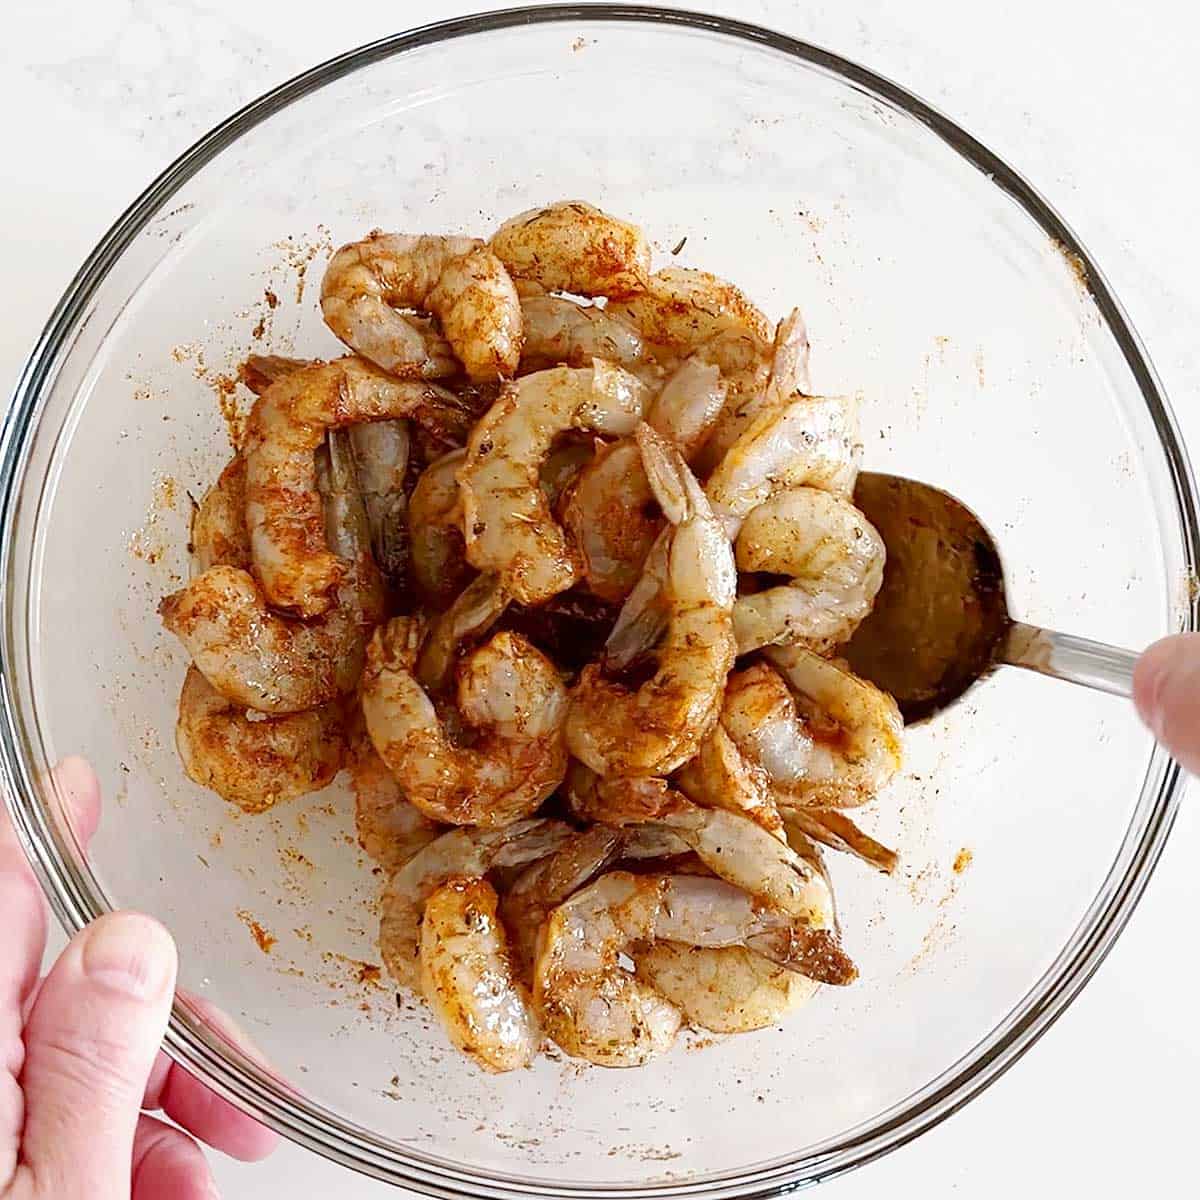 Mixing the shrimp with oil and spices.